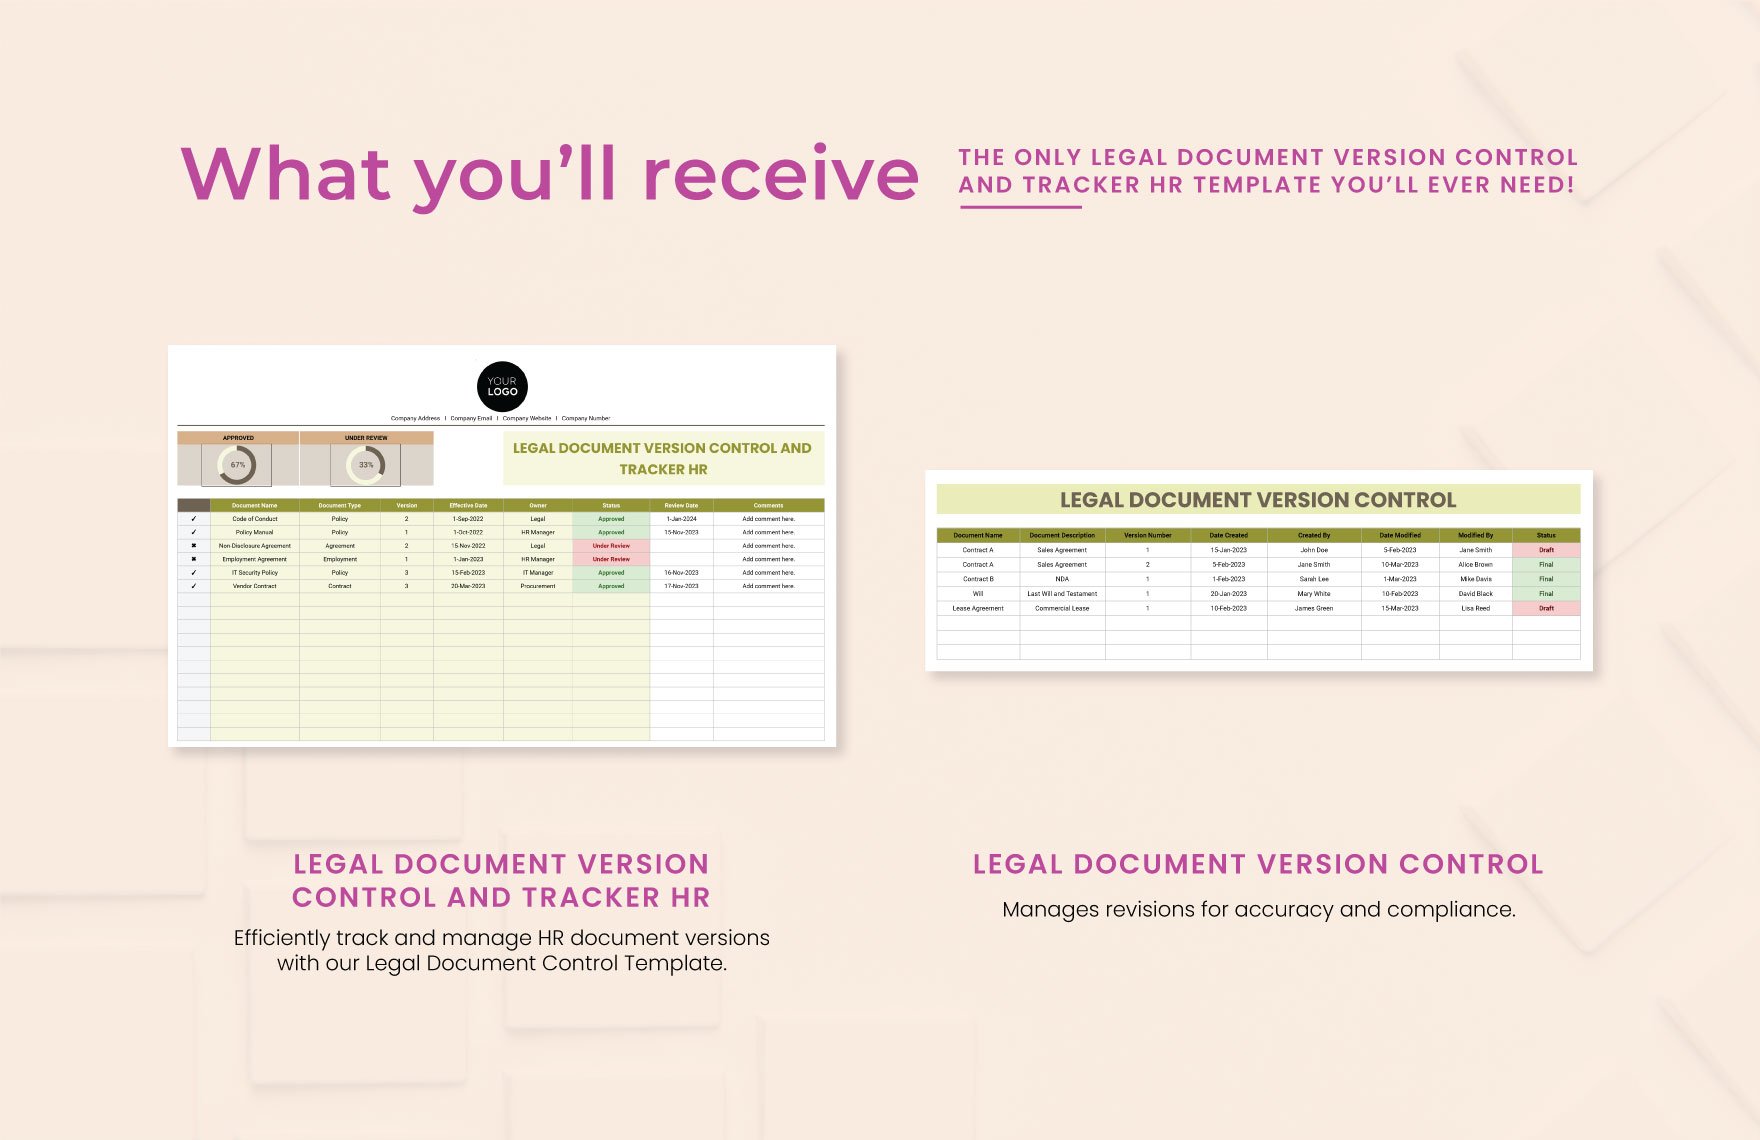 Legal Document Version Control and Tracker HR Template